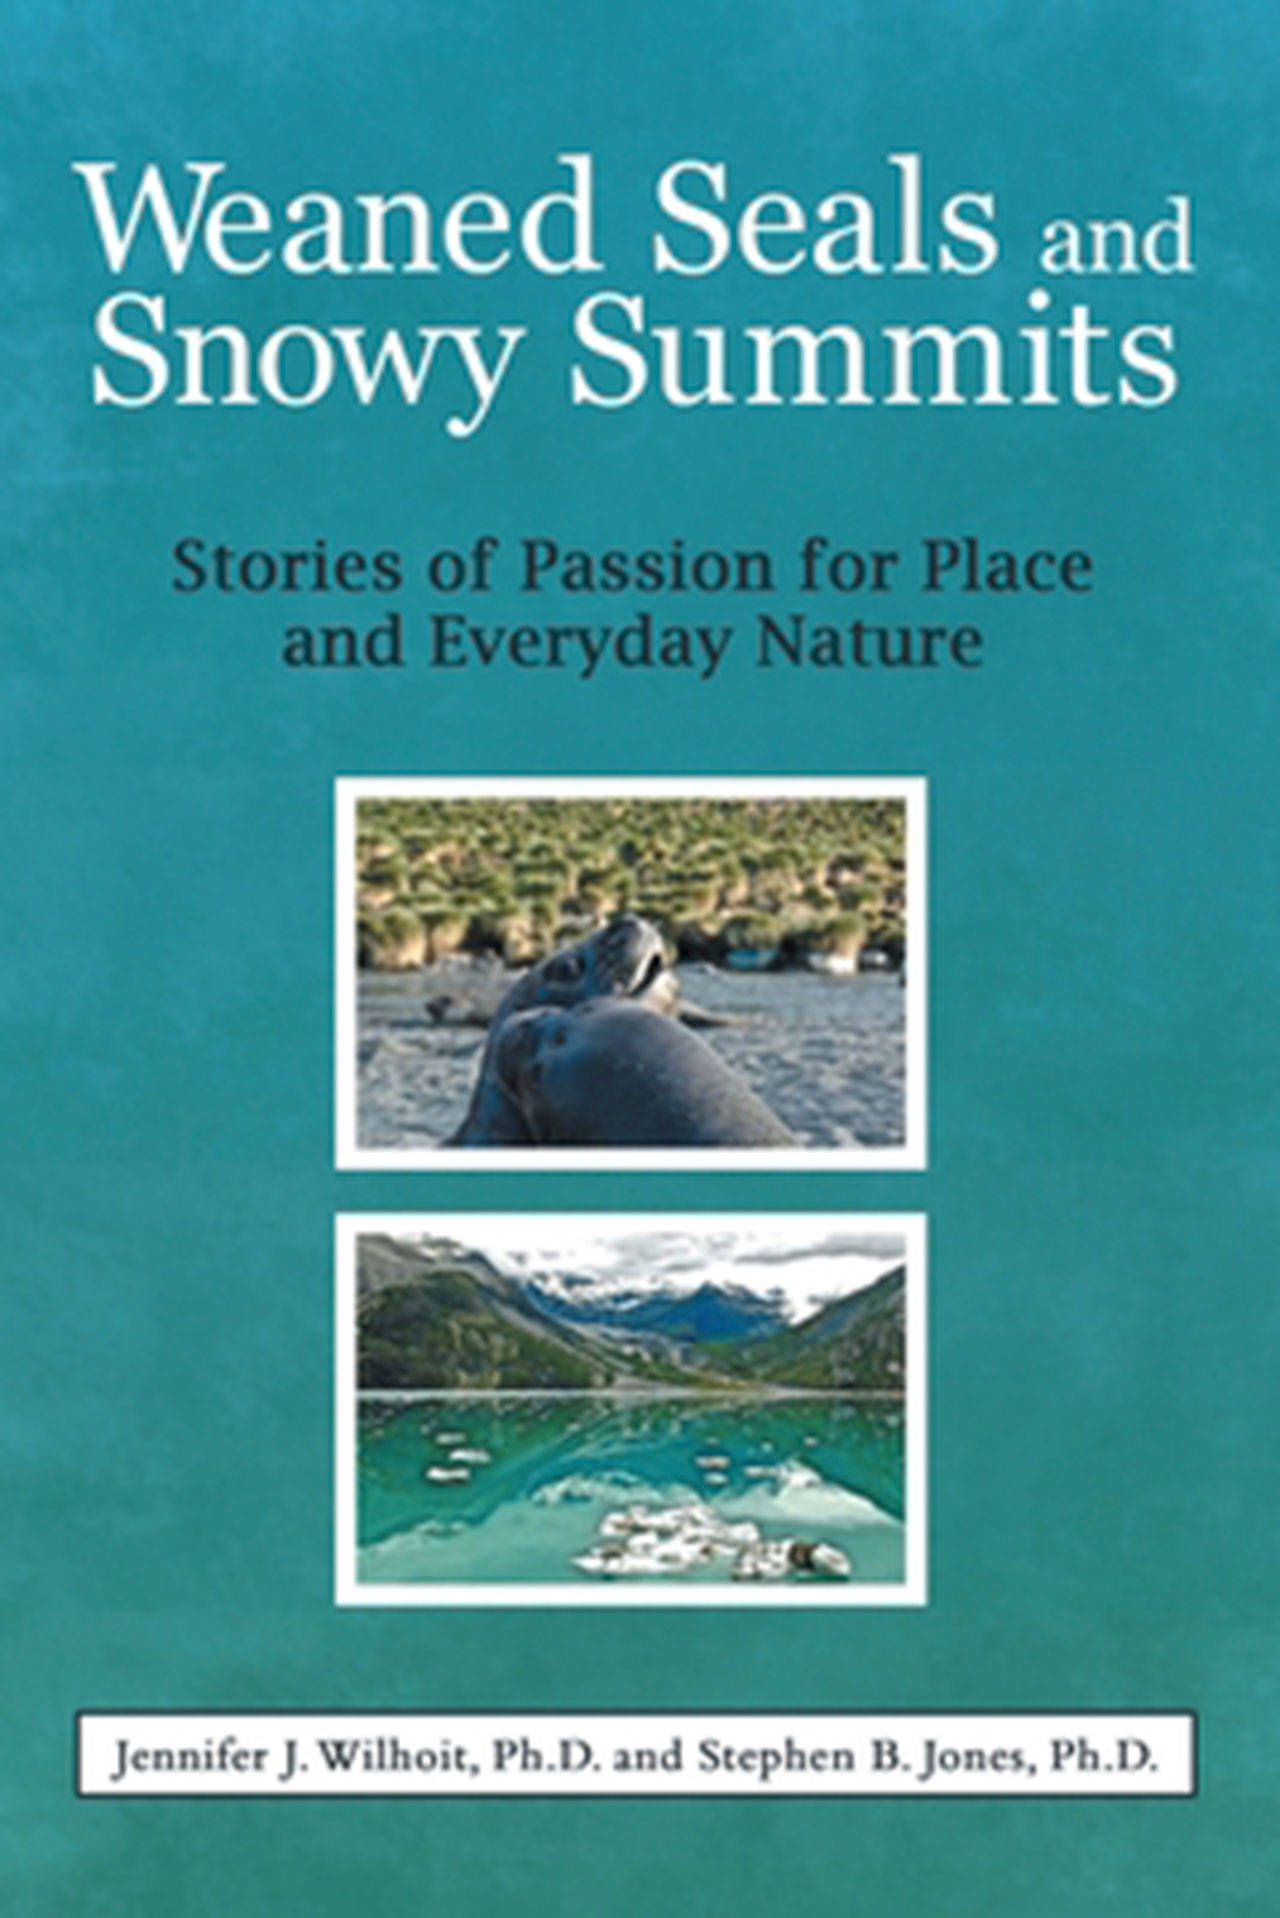 Image courtesy of Eagle Harbor Book Company | Author and memoirist Jennifer Wilhoit will visit Eagle Harbor Book Company at 3 p.m. Sunday, Nov. 10 to discuss the book “Weaned Seals and Snowy Summits: Stories of Passion for Place and Everyday Nature,” which she co-authored with Stephen B. Jones.